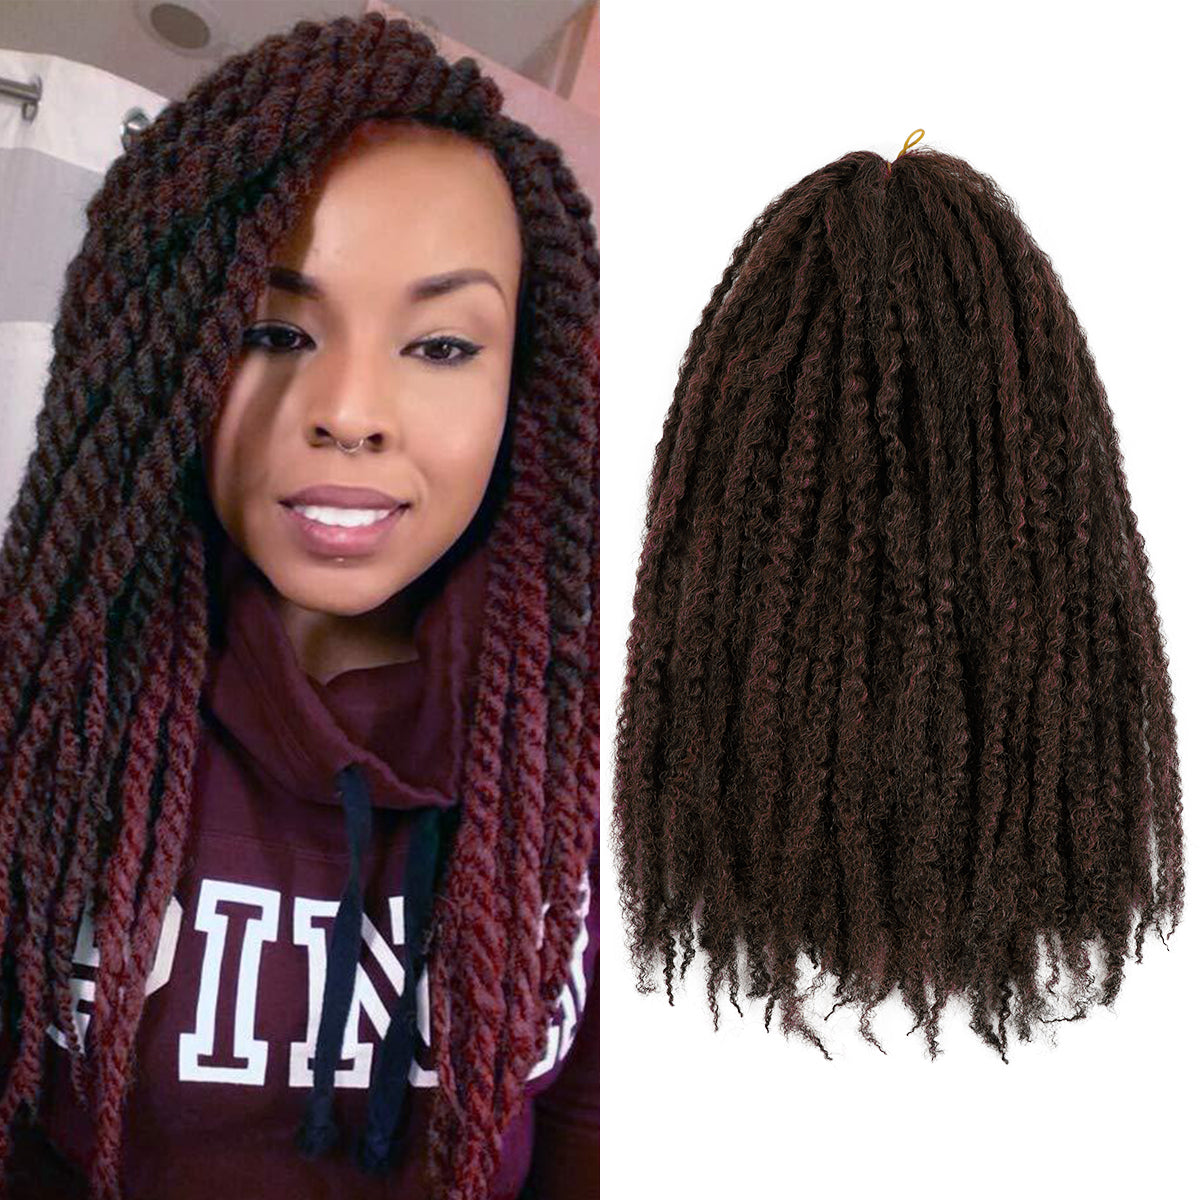 Authentic Synthetic Hair Crochet Braids Afro Twist 18" (Marley Style)